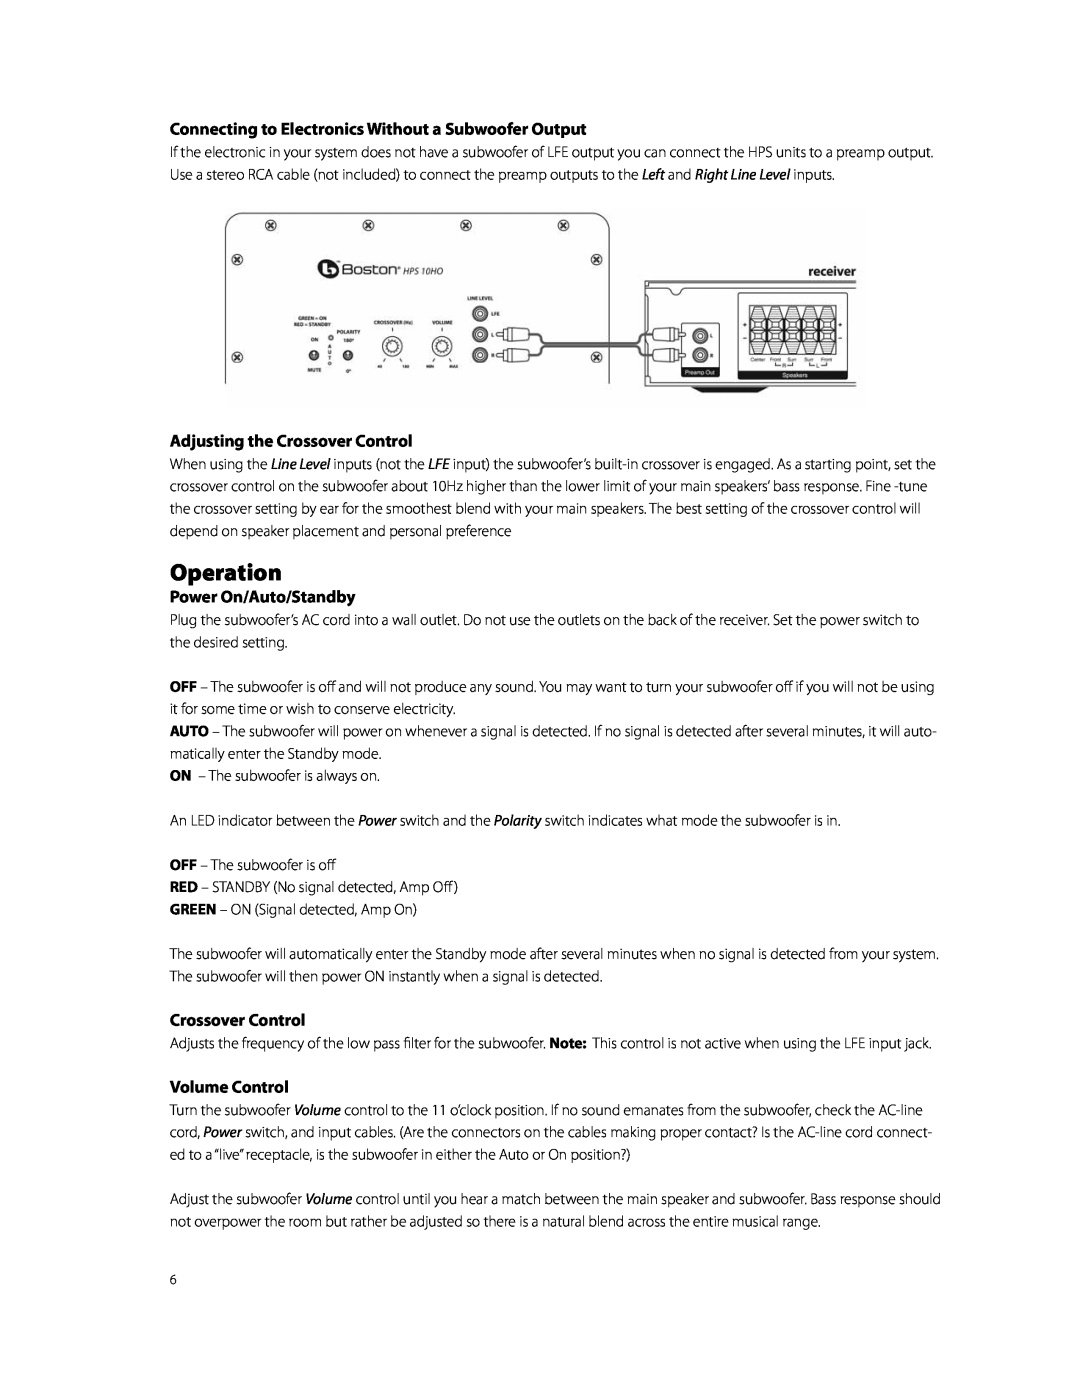 Boston Acoustics HPS10HO owner manual Operation, Adjusting the Crossover Control, Power On/Auto/Standby, Volume Control 